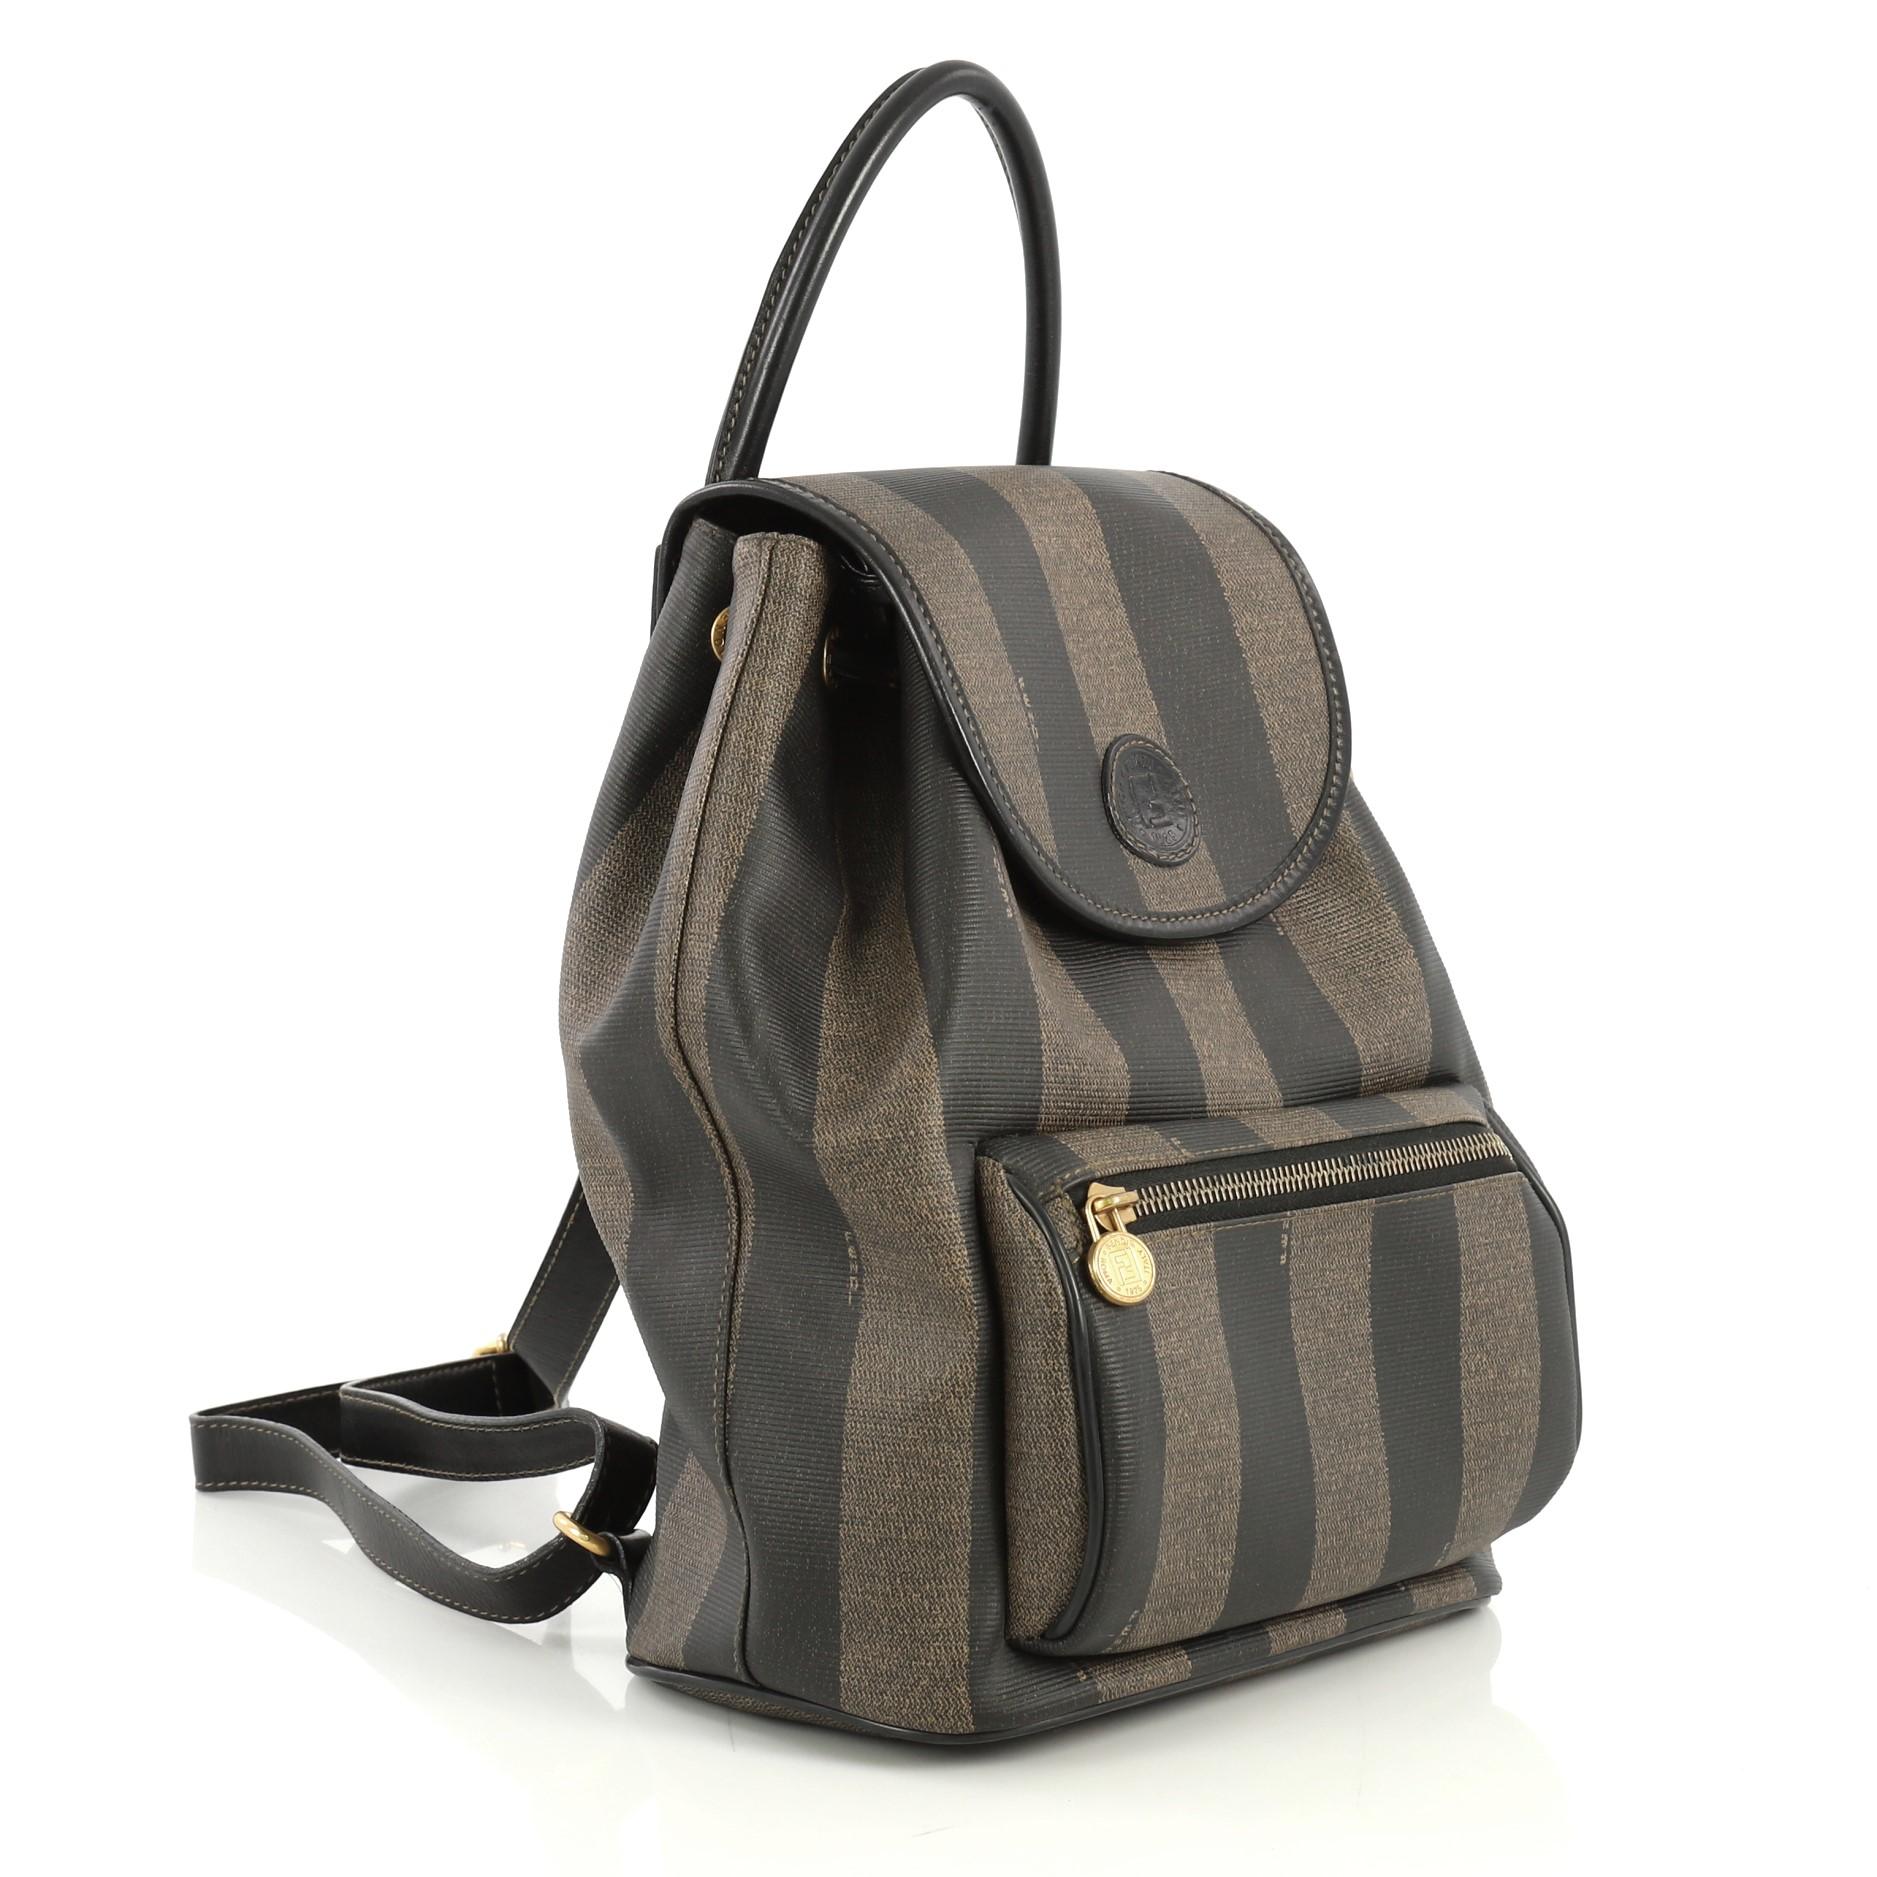 This Fendi Pequin Front Pocket Backpack Coated Canvas Medium, crafted from brown coated canvas, features rolled top handle, adjustable shoulder straps, exterior front zip pocket, and gold-tone hardware. Its flap and drawstring closure opens to a